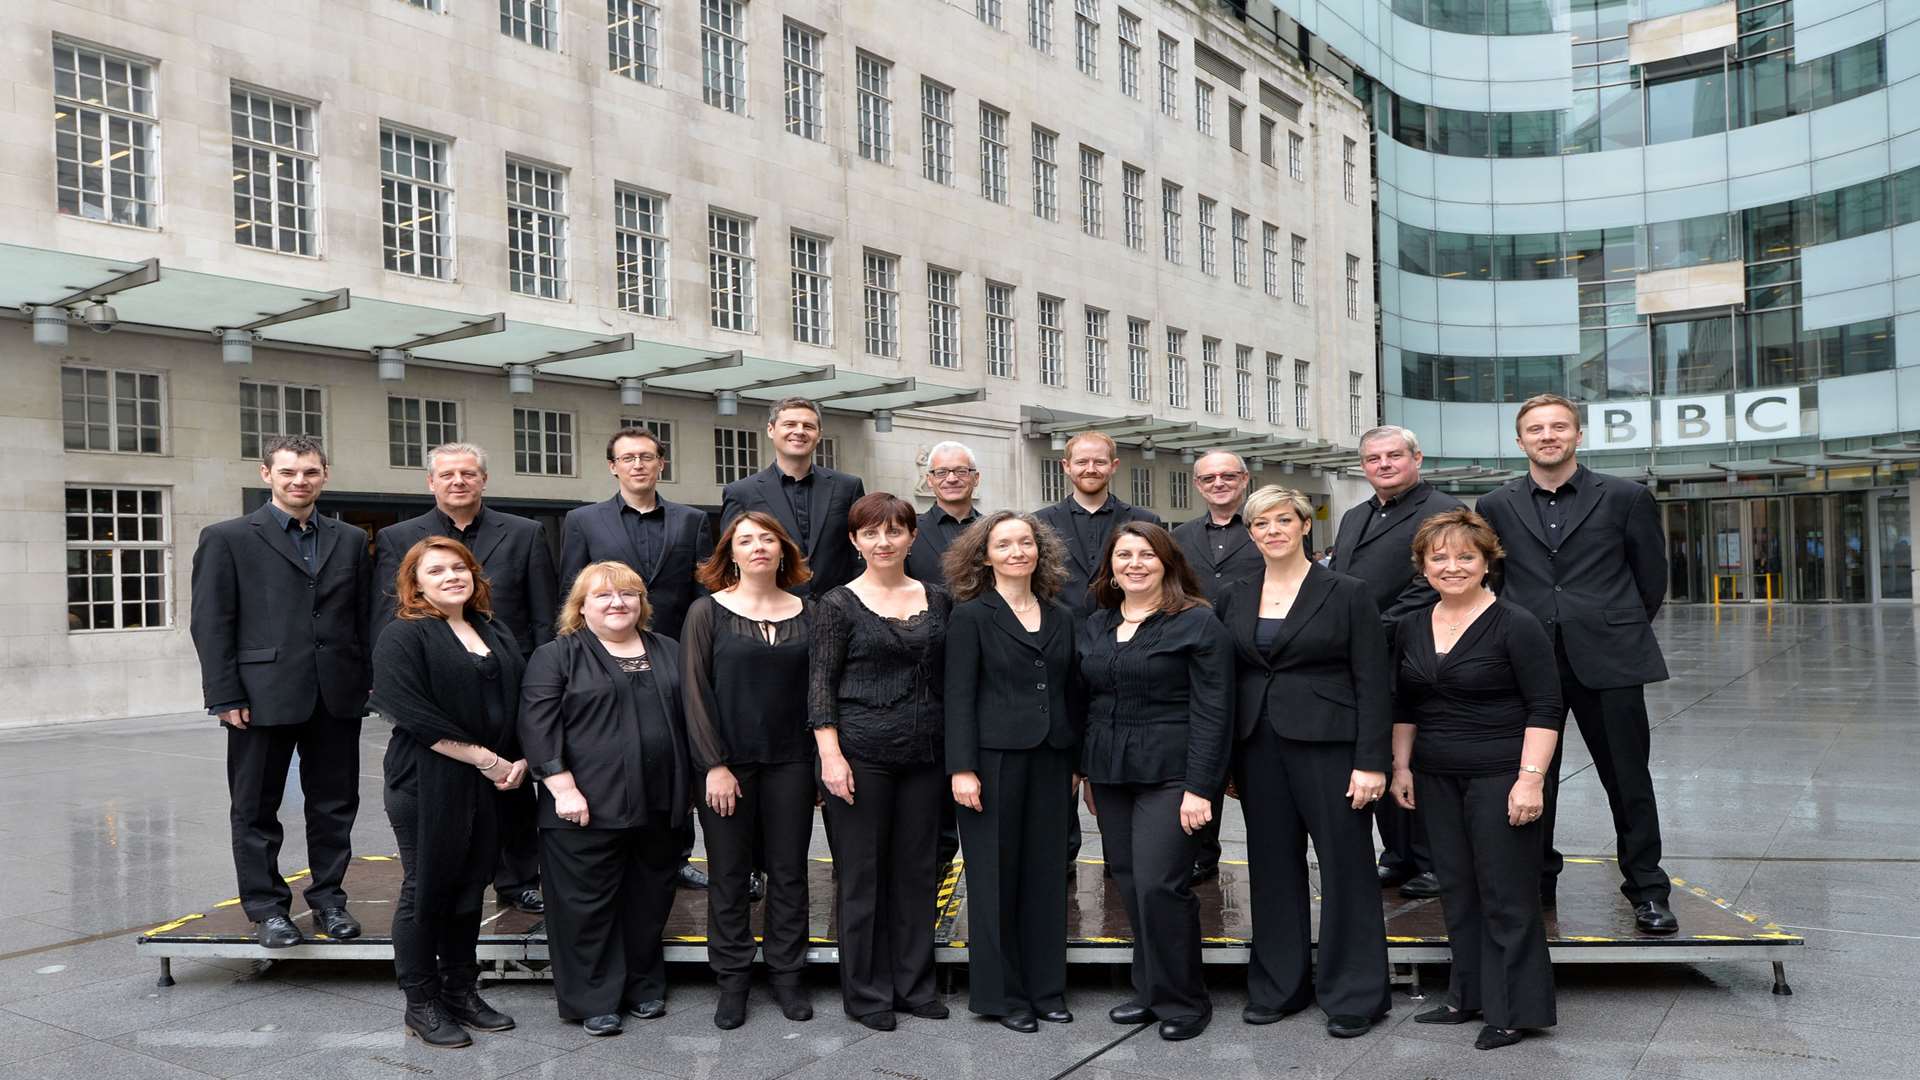 The BBC Singers will perform at the JAM on the Marsh